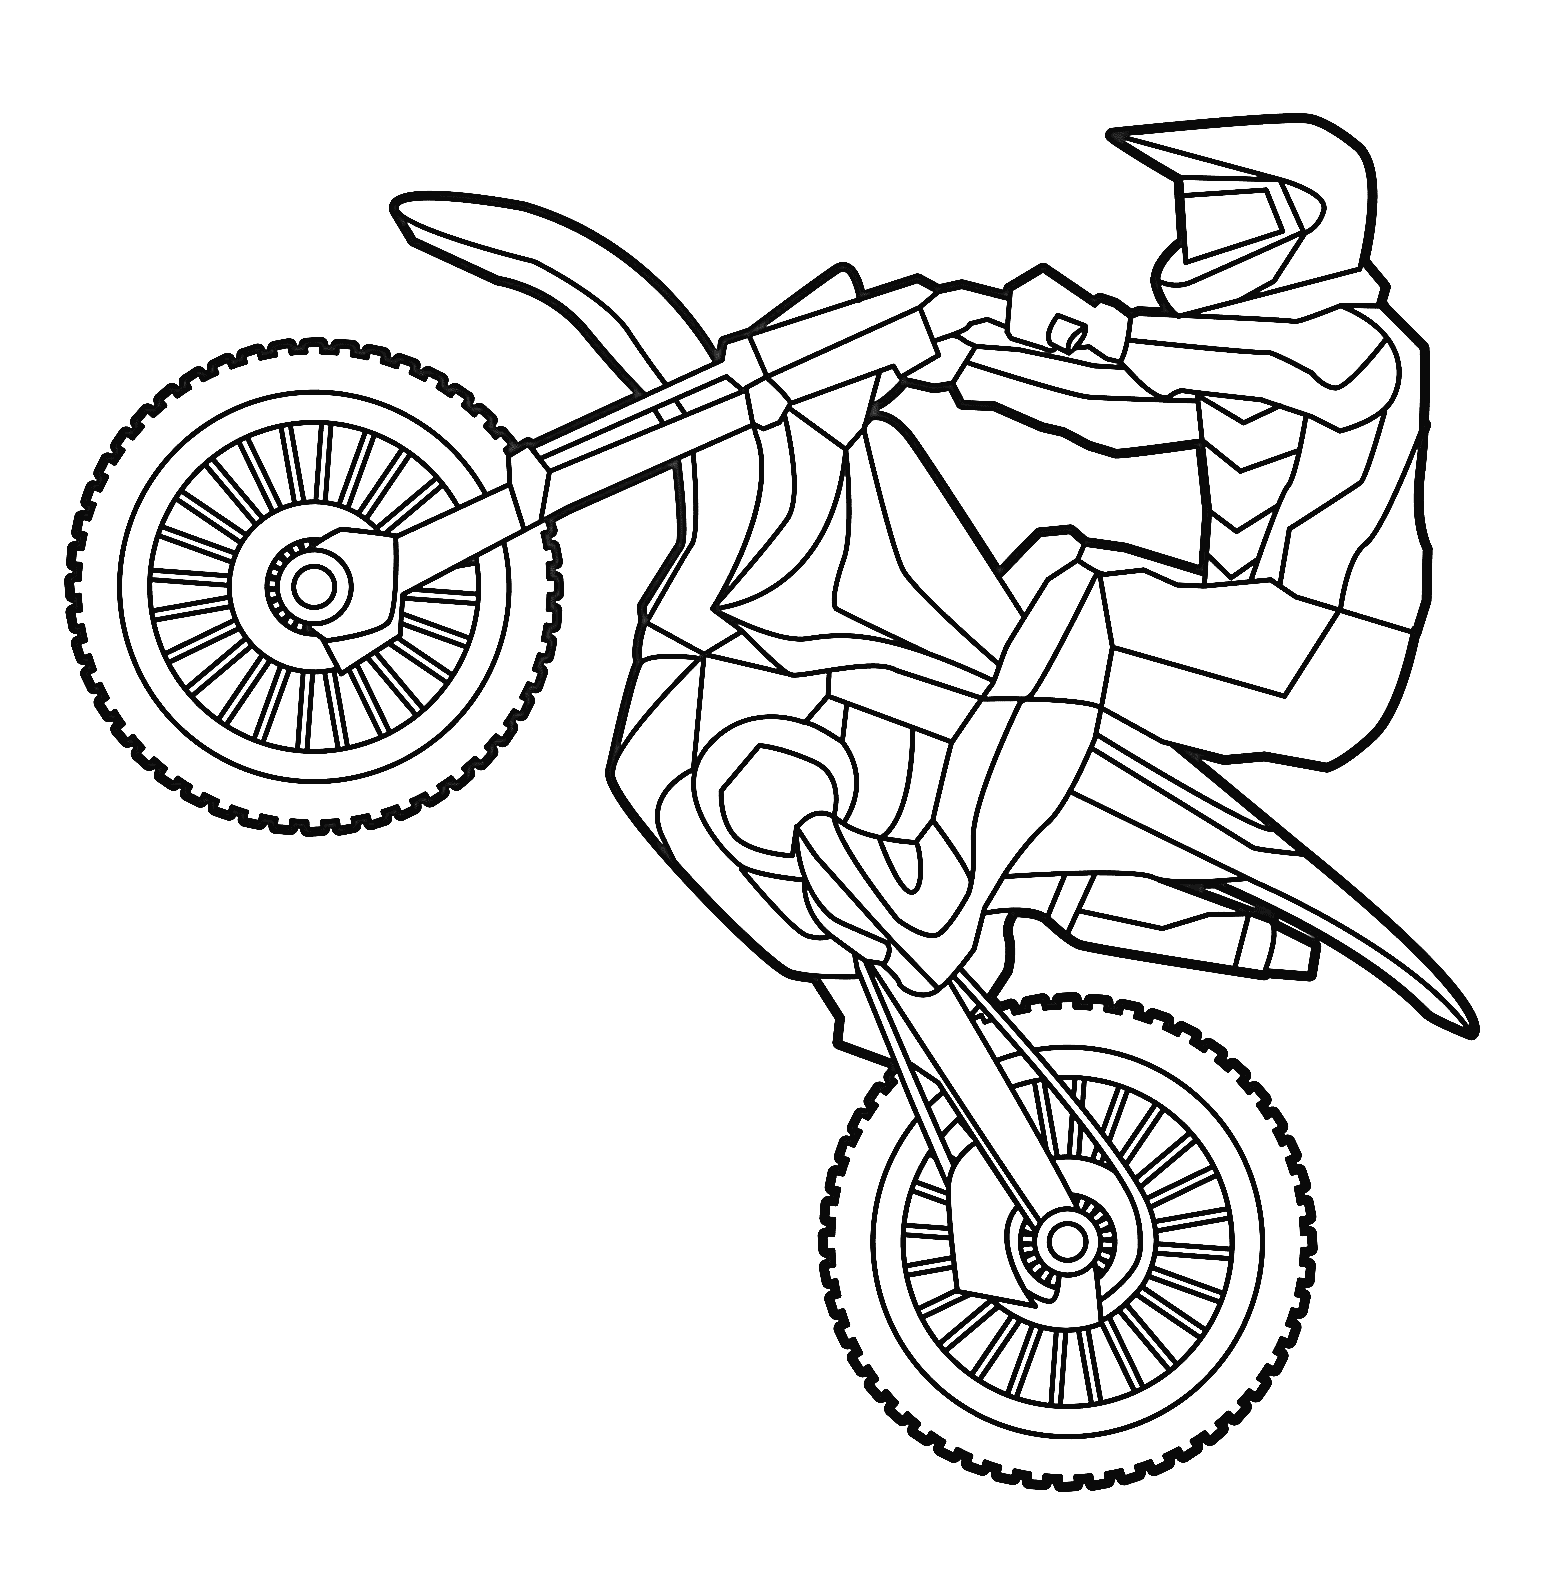 Dirt bike coloring pages printable for free download